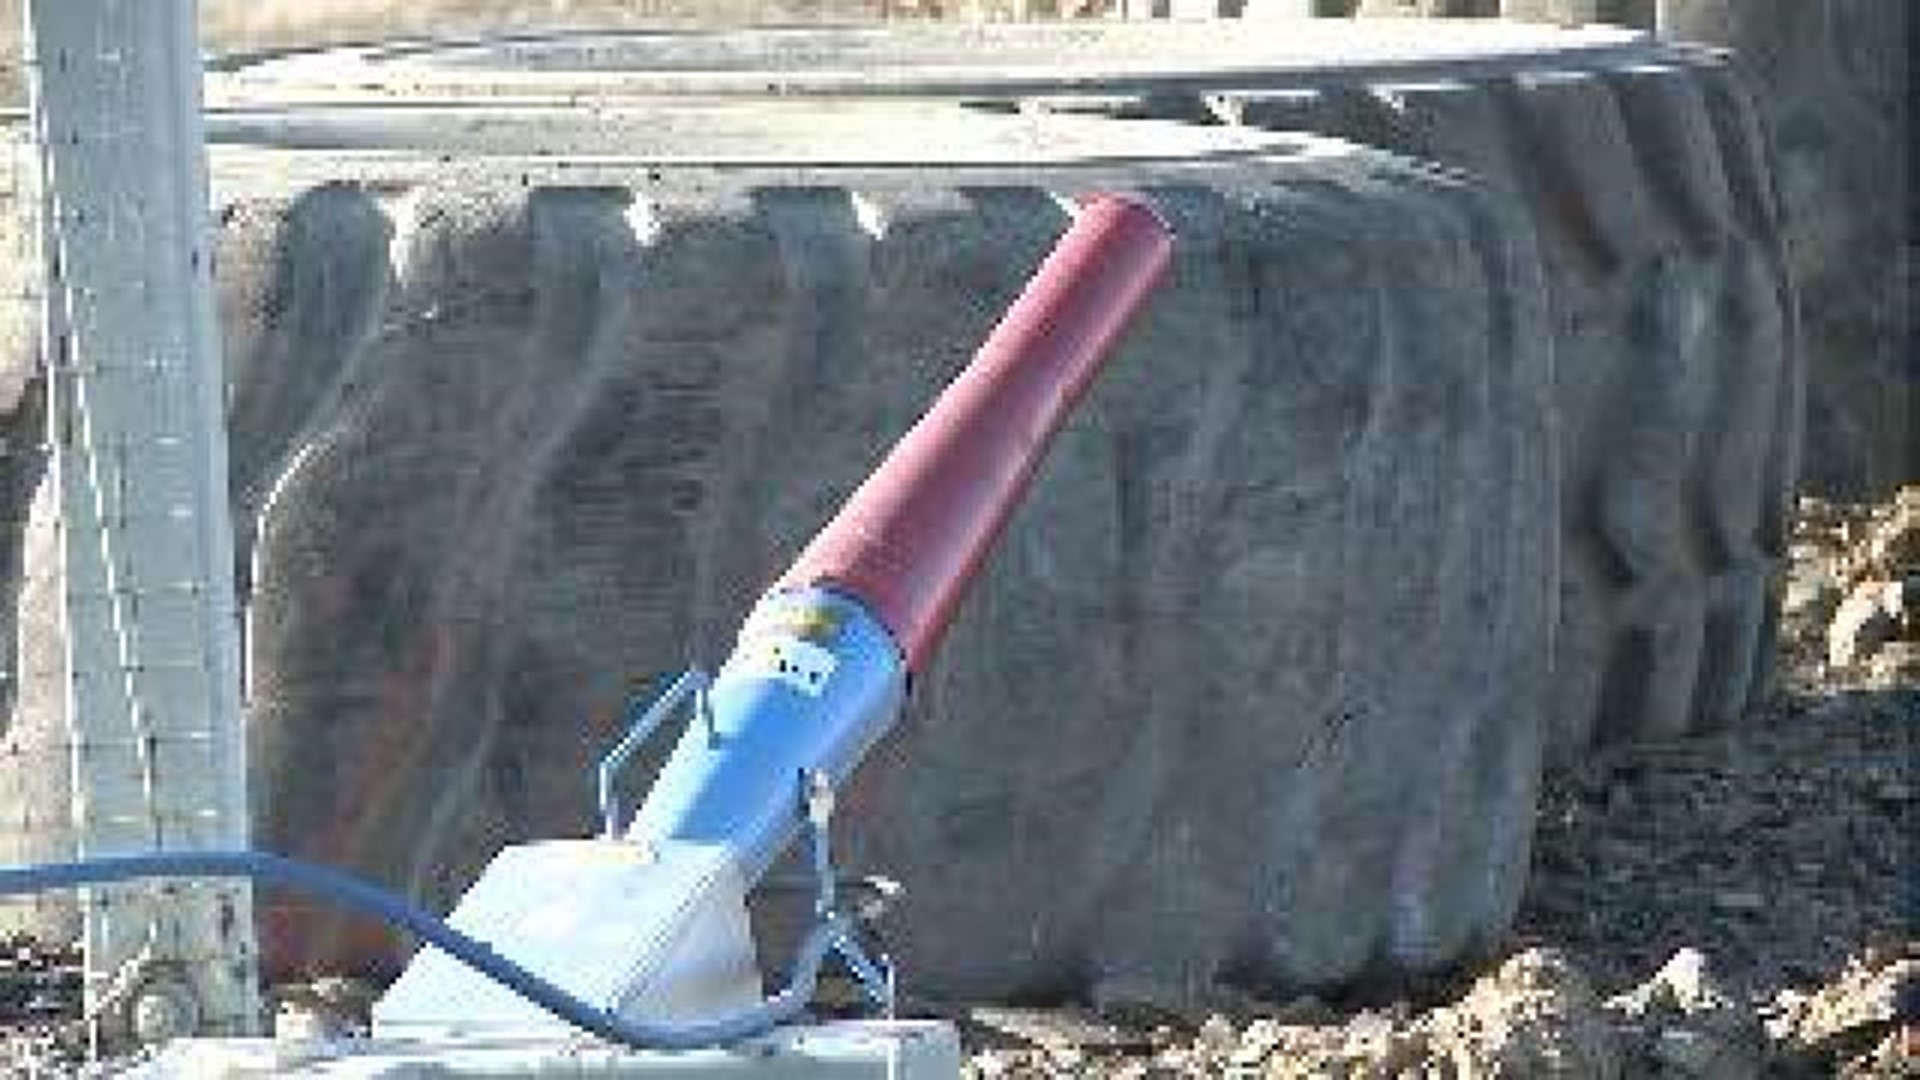 Cannons Used to Scare Birds from Landfill